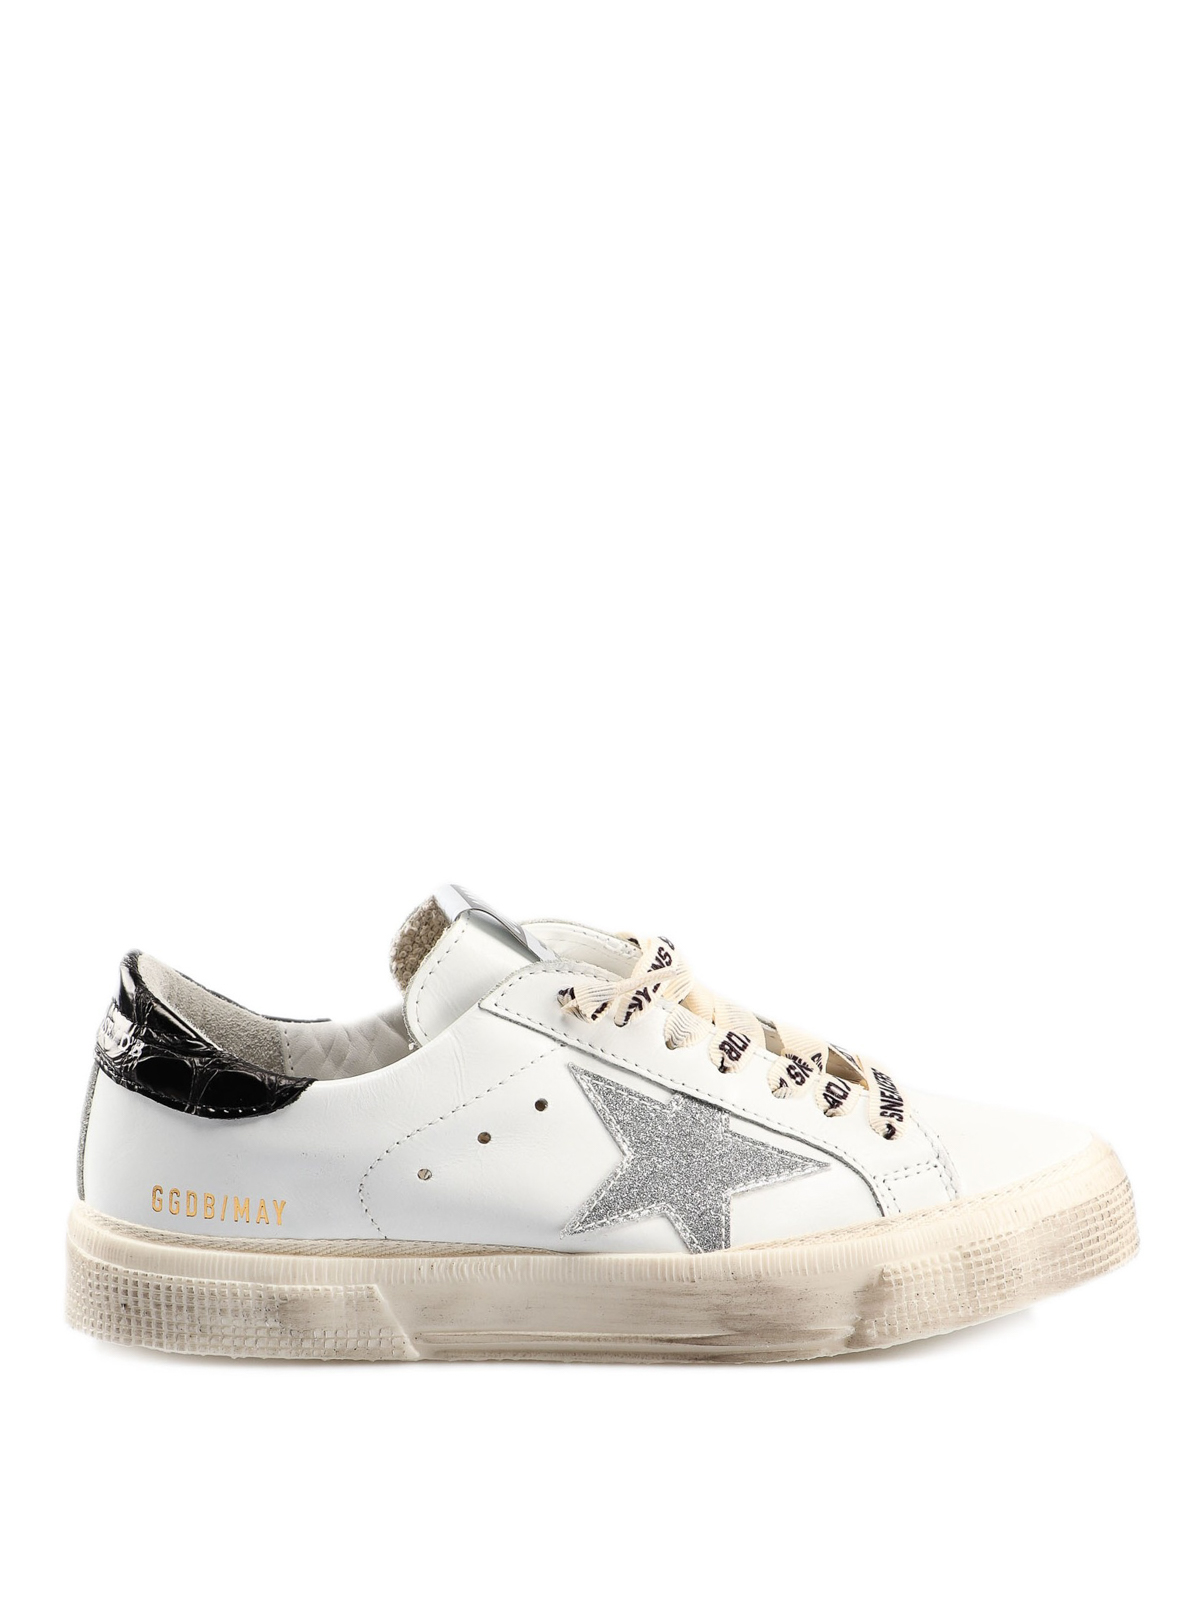 Trainers Golden Goose - May black patent leather heel tab sneakers ...